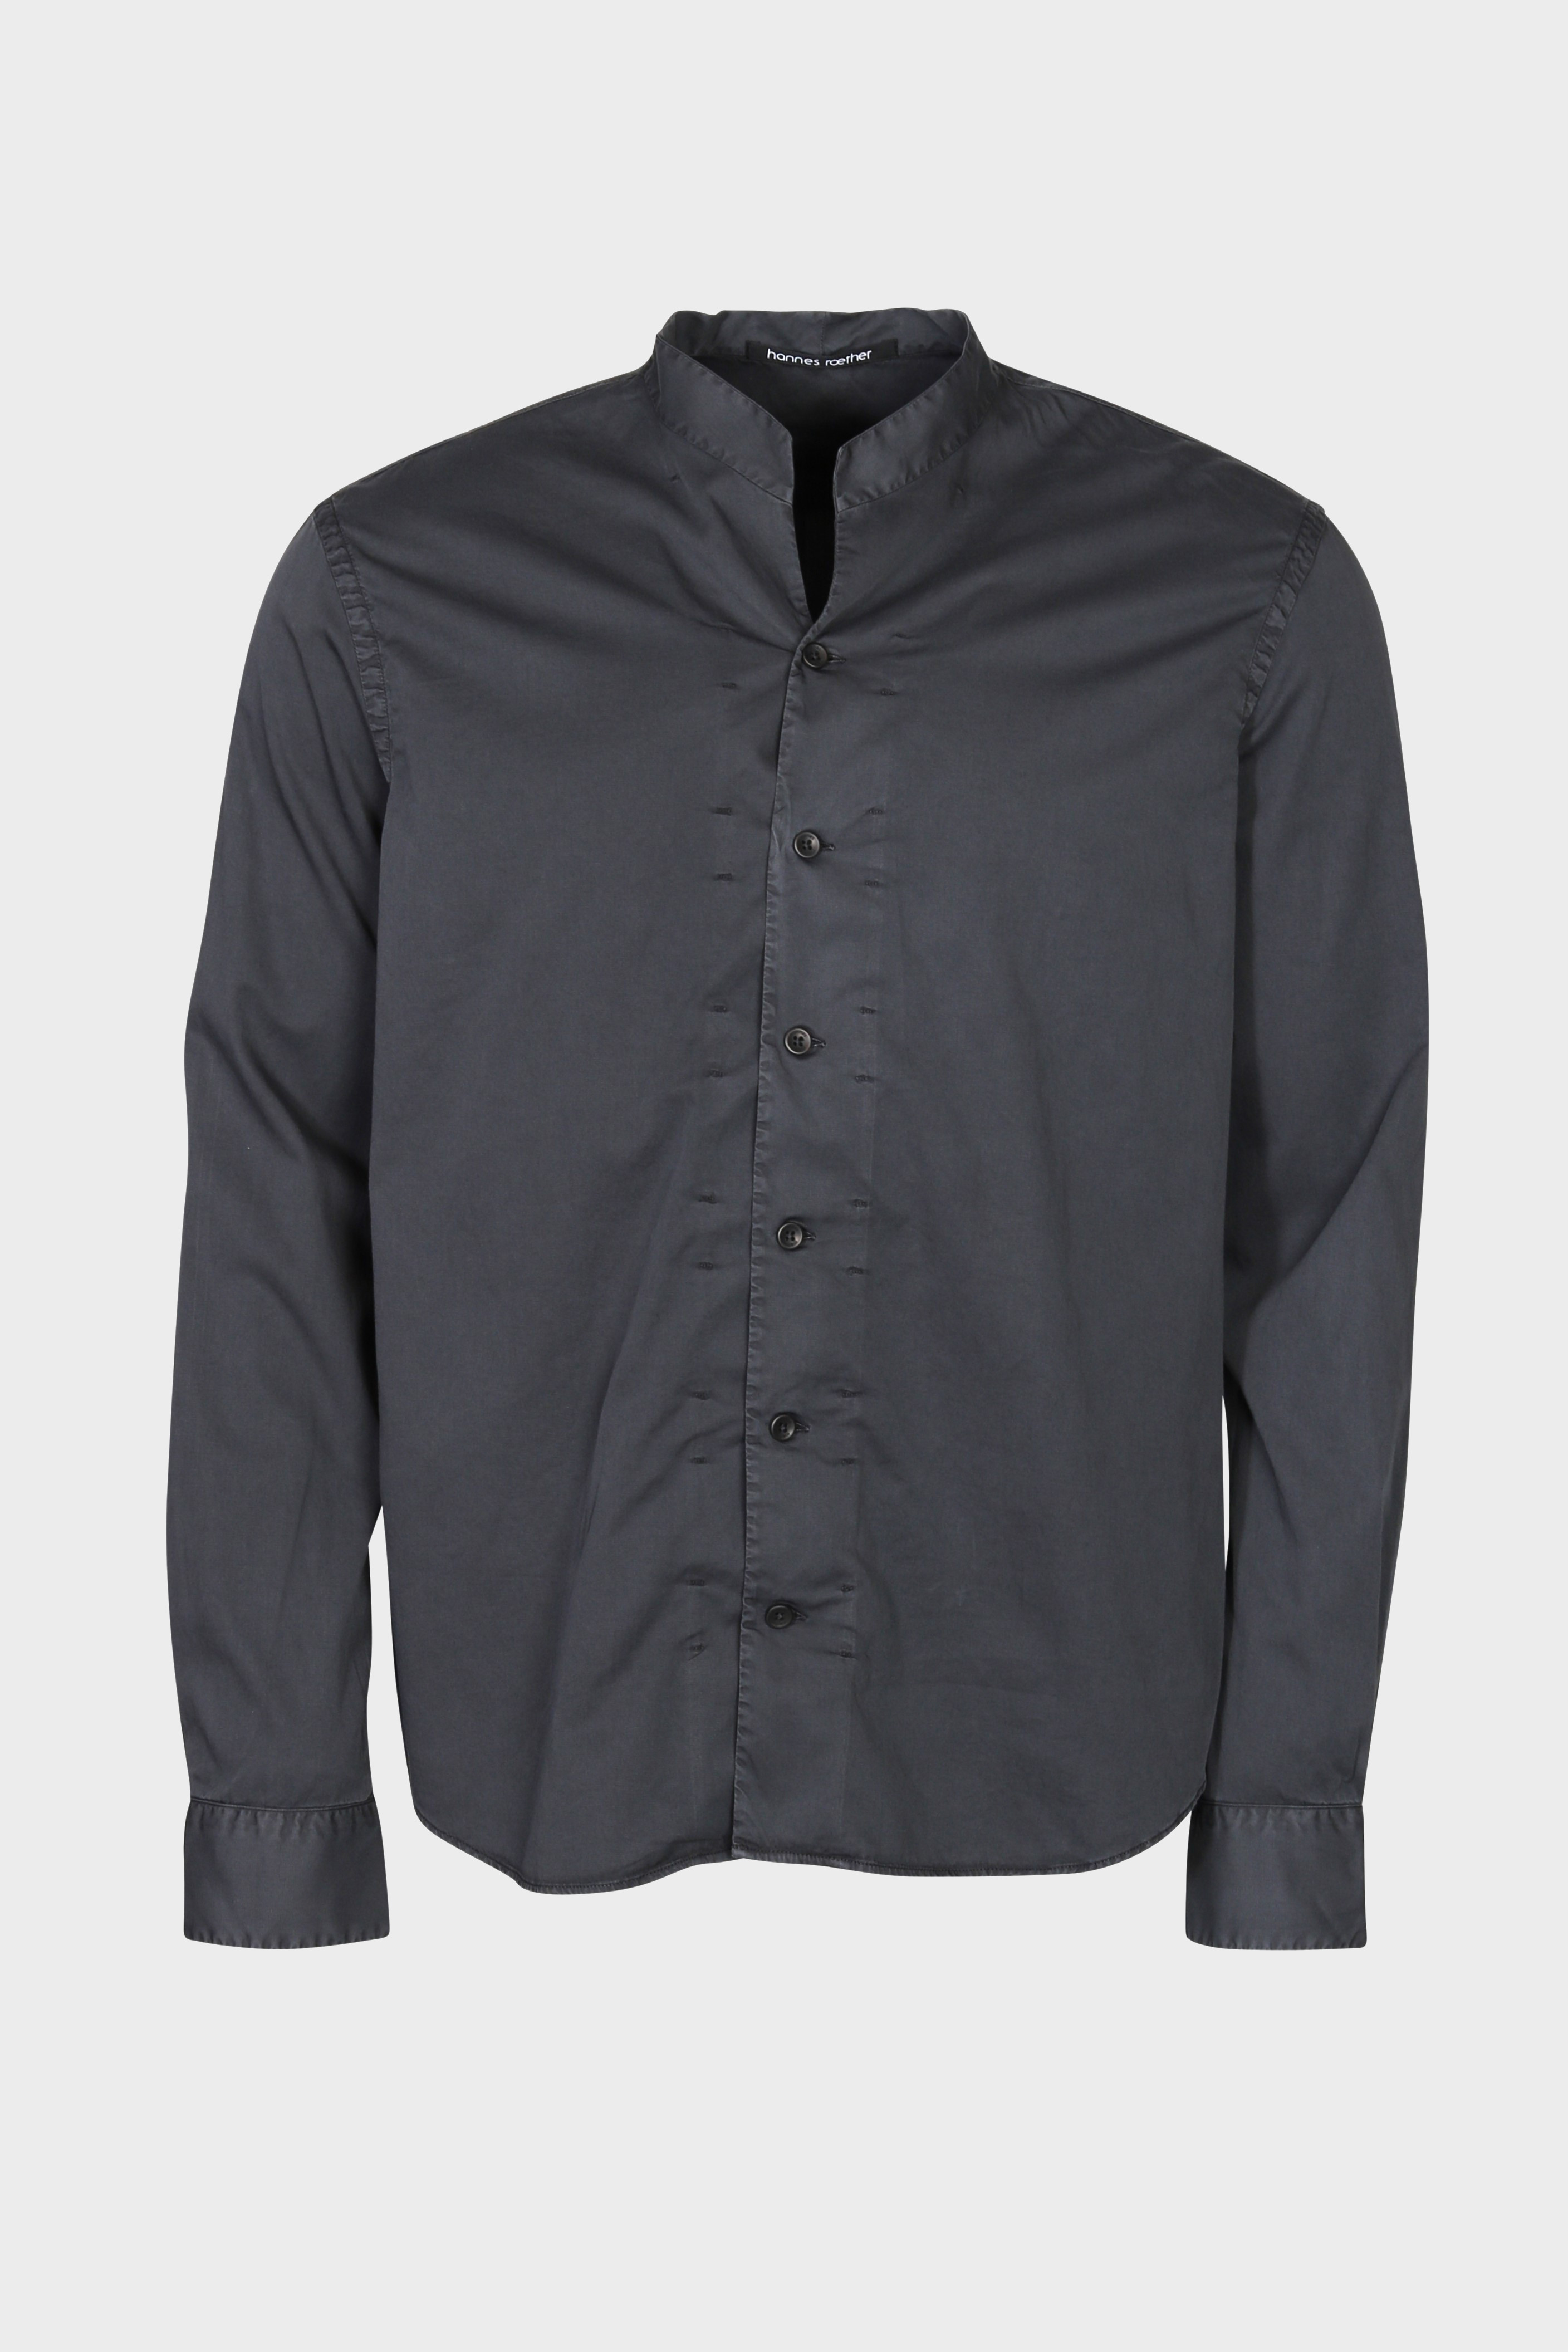 HANNES ROETHER Cotton Shirt in Black M